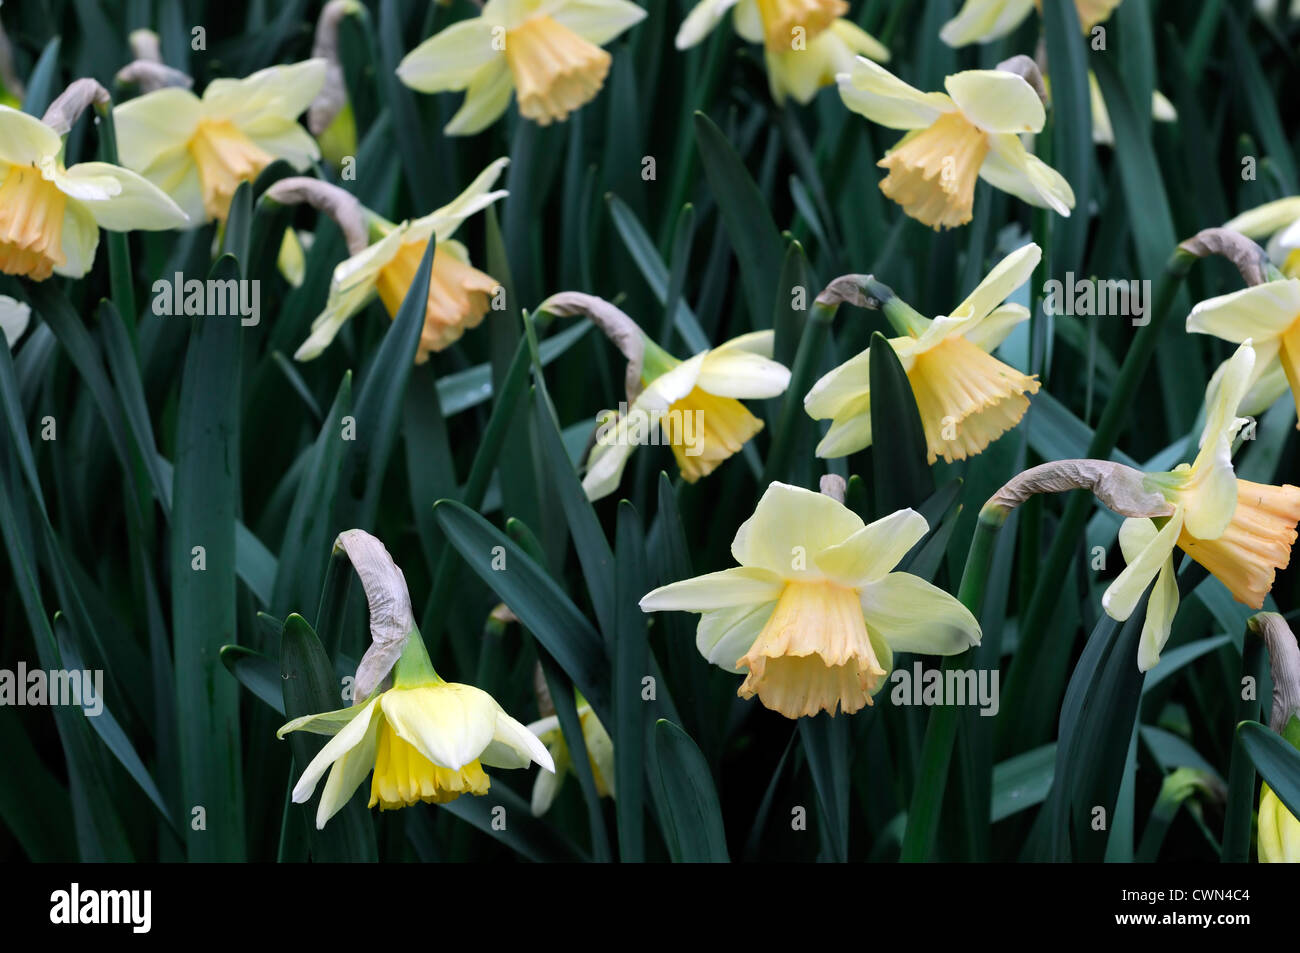 narcissus lorikeet apricot pale yellow trumpet daffodil flowers narcissi daffodils bulbs spring flowering bloom blossom Stock Photo